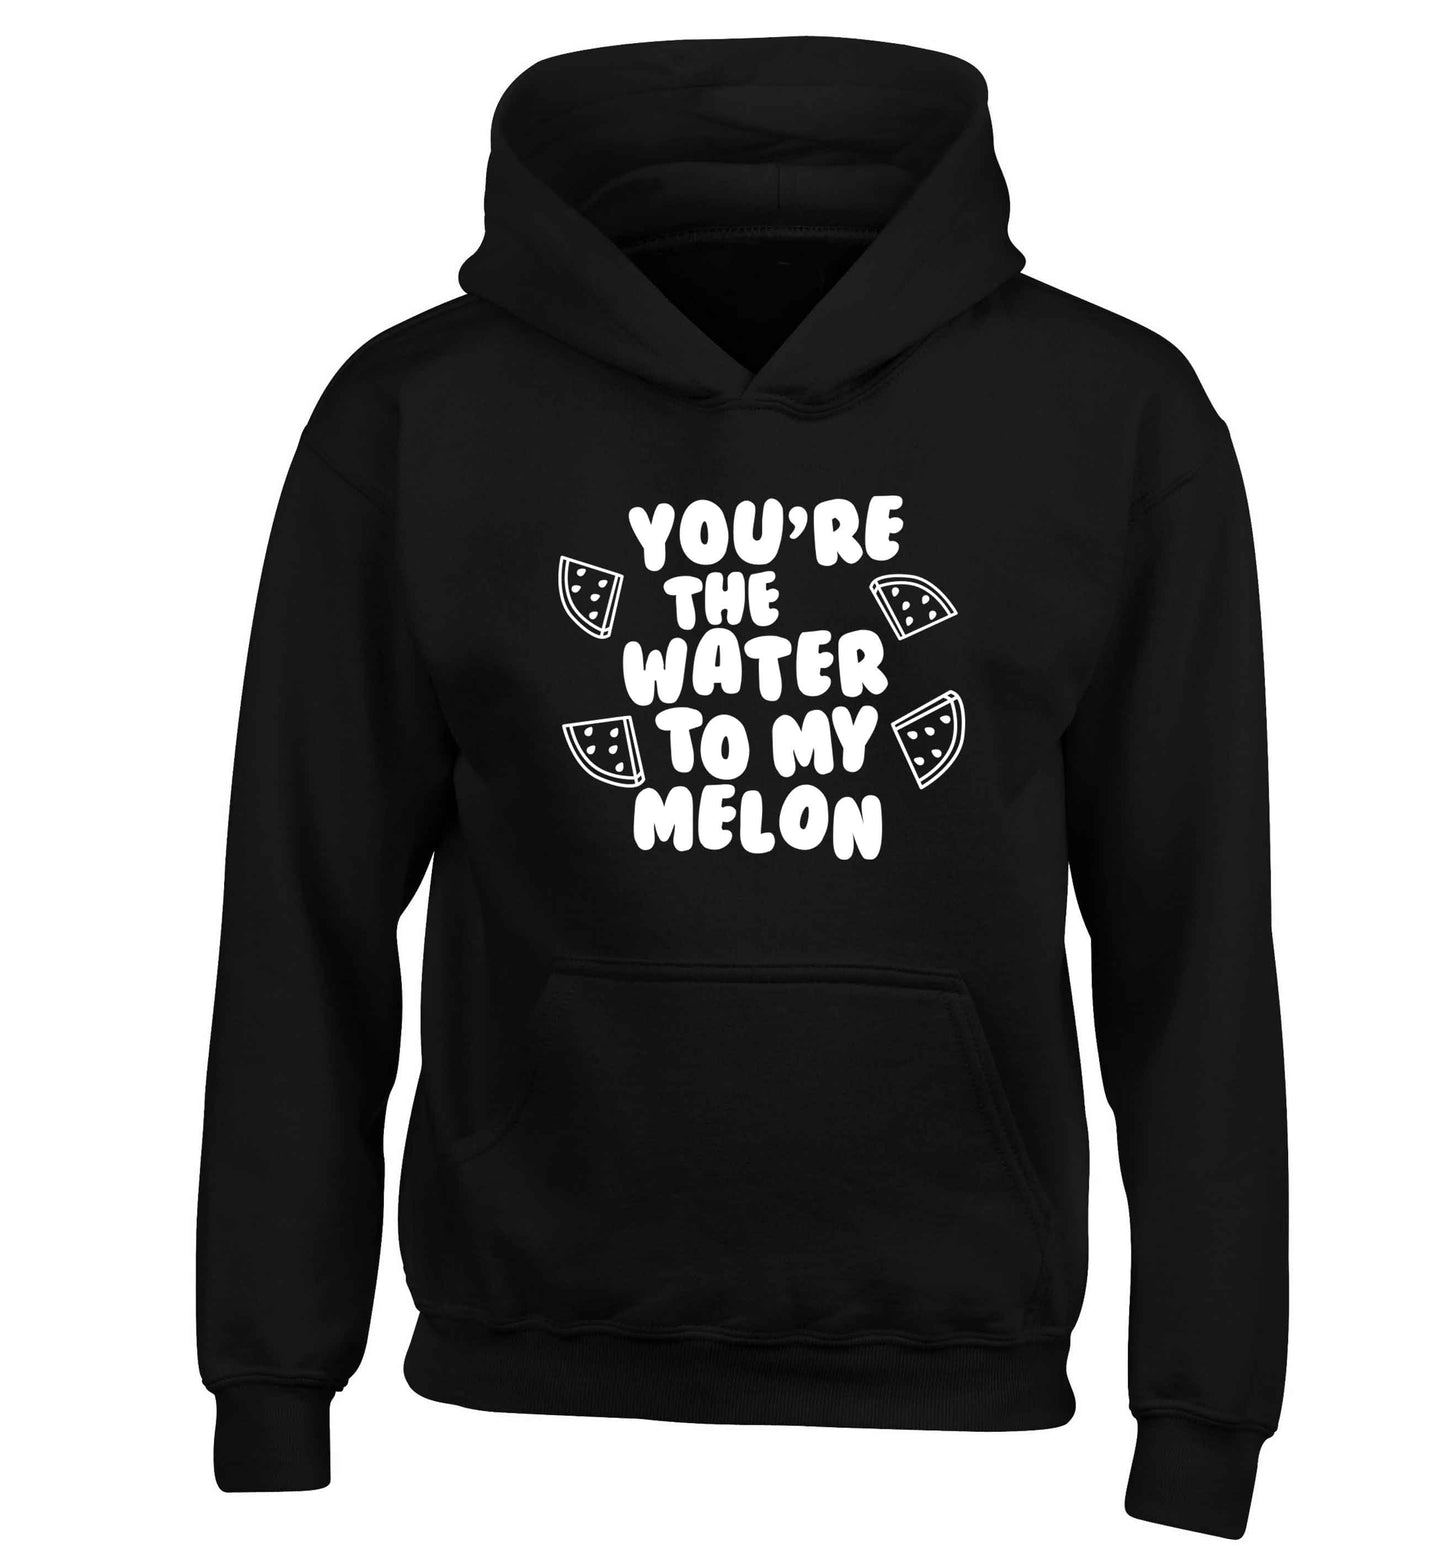 You're the water to my melon children's black hoodie 12-13 Years